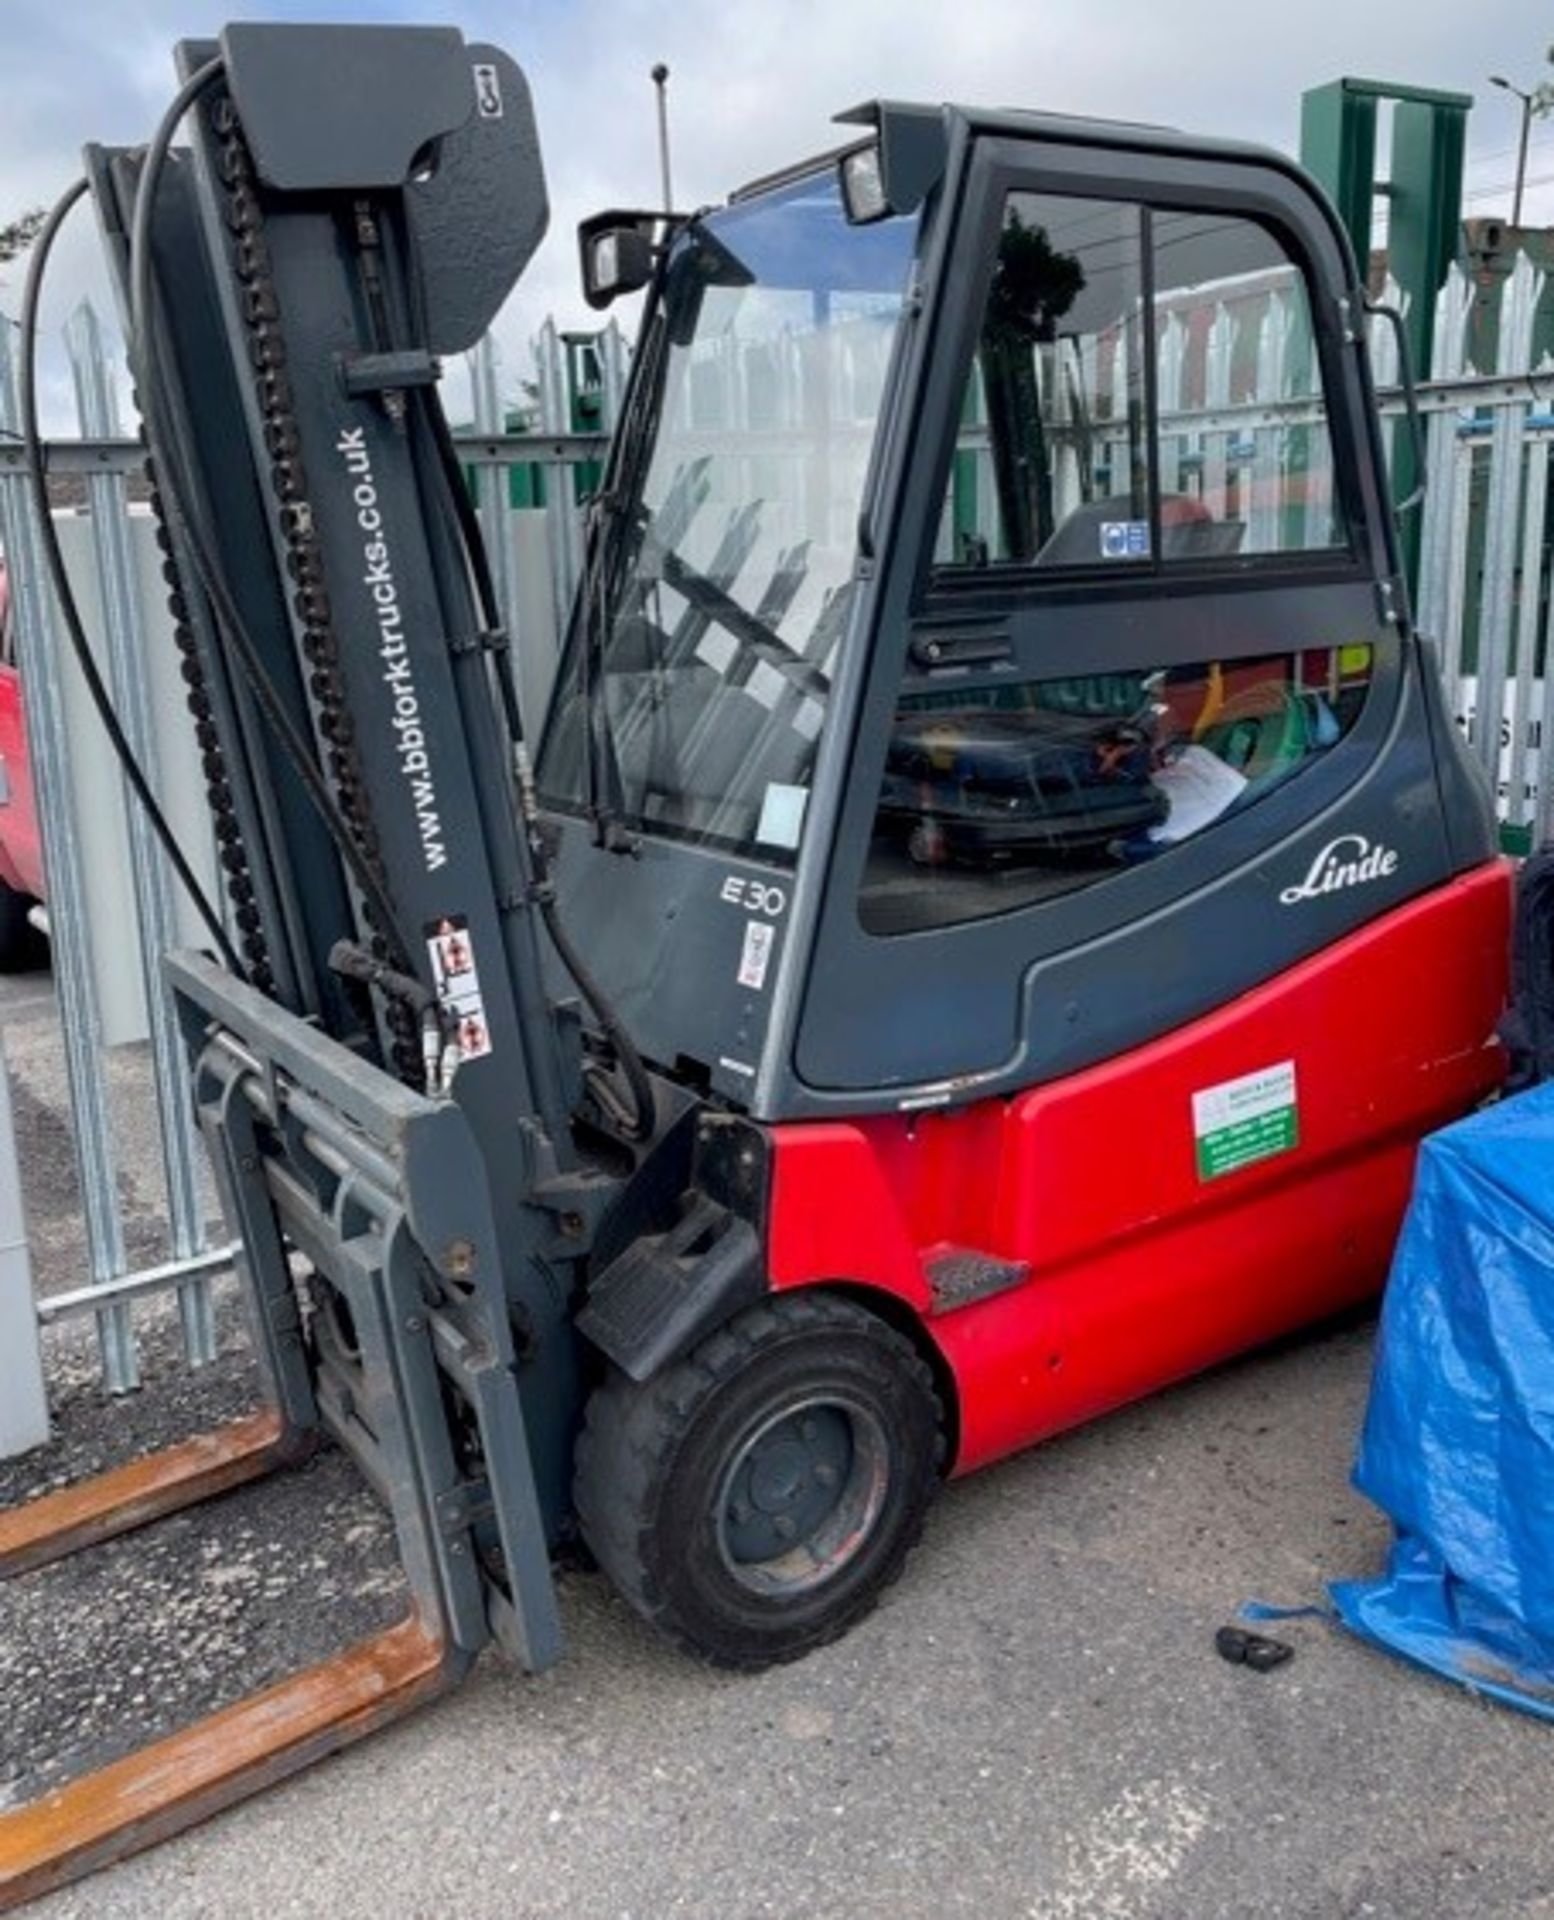 Linde E30 4 Wheel Electric Forklift (2008) 3000Kg Capacity, Serial Number; G1X336W50734 with Side - Image 3 of 8